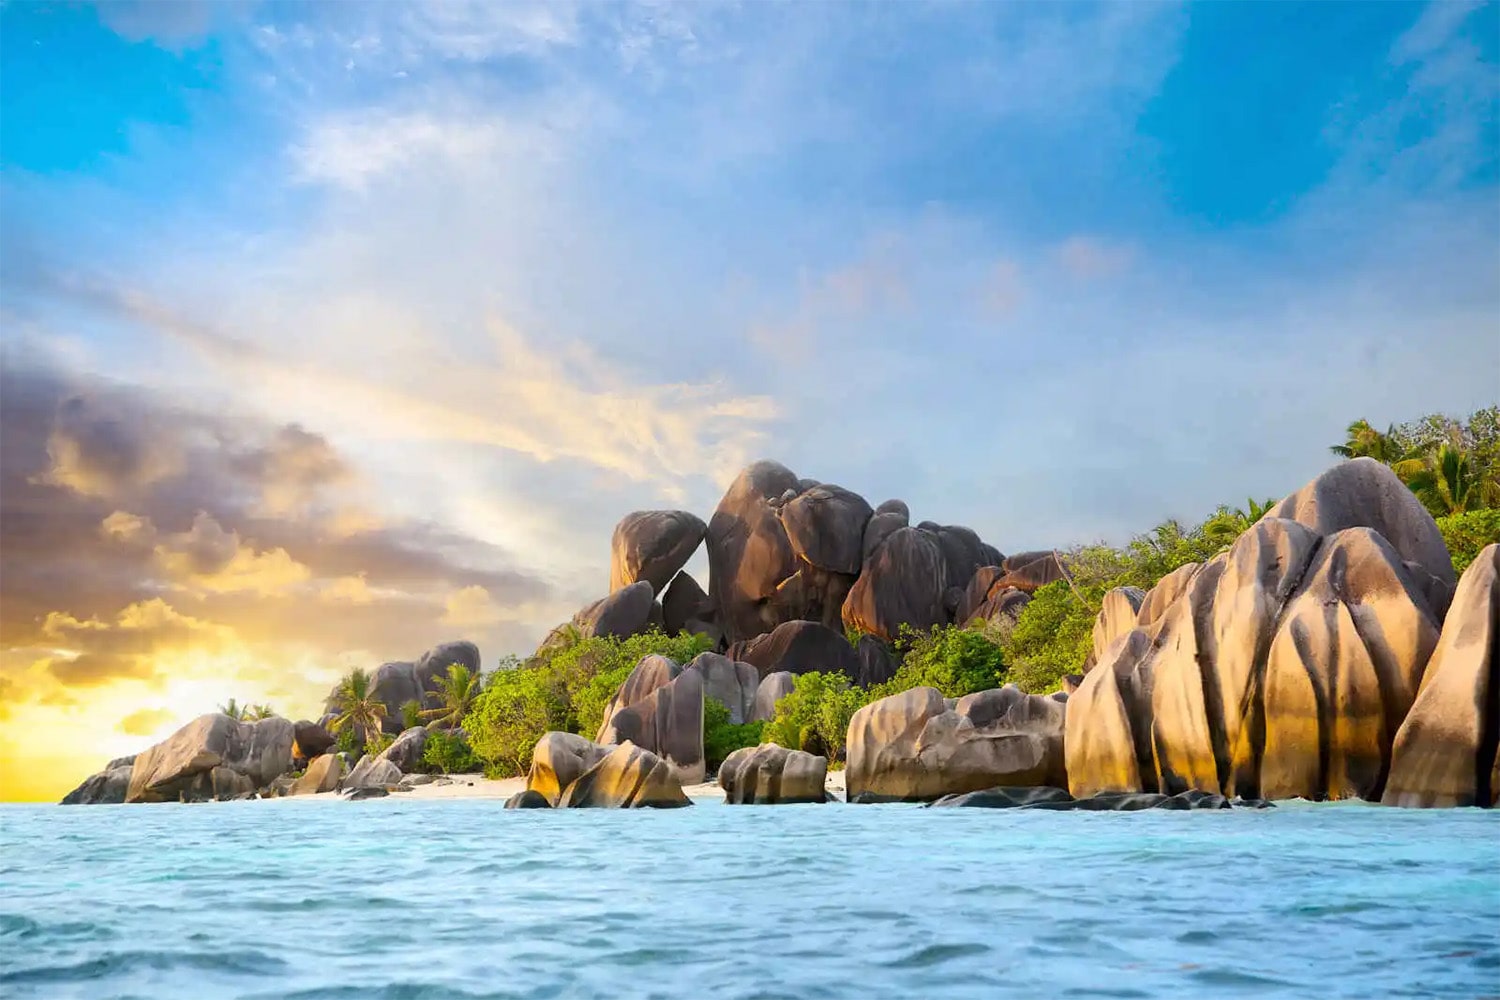 30 interesting facts about Seychelles Islands